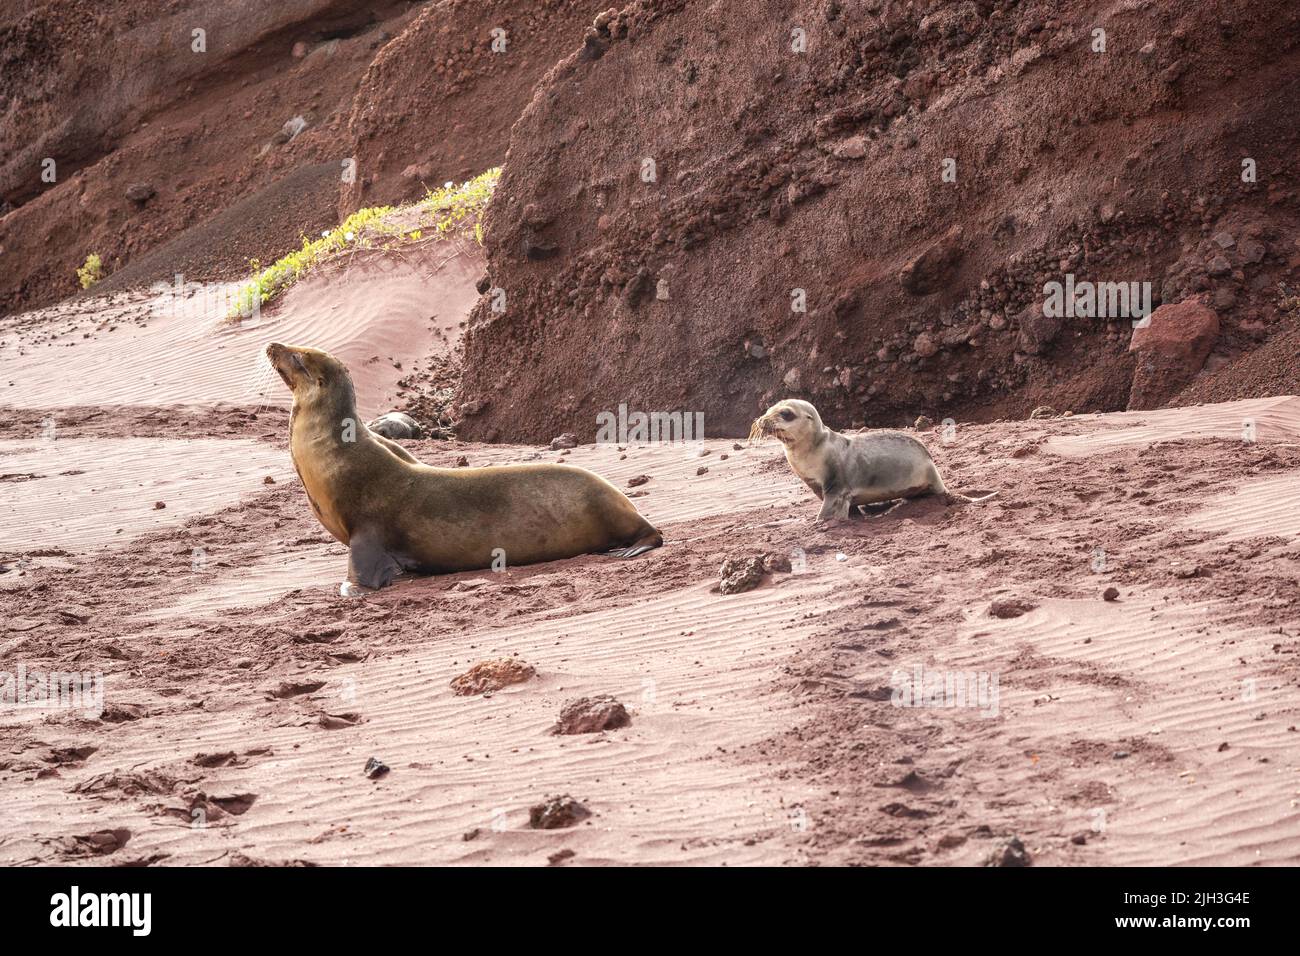 Baby sea lion follows its mother on beach in the Galapagos Stock Photo